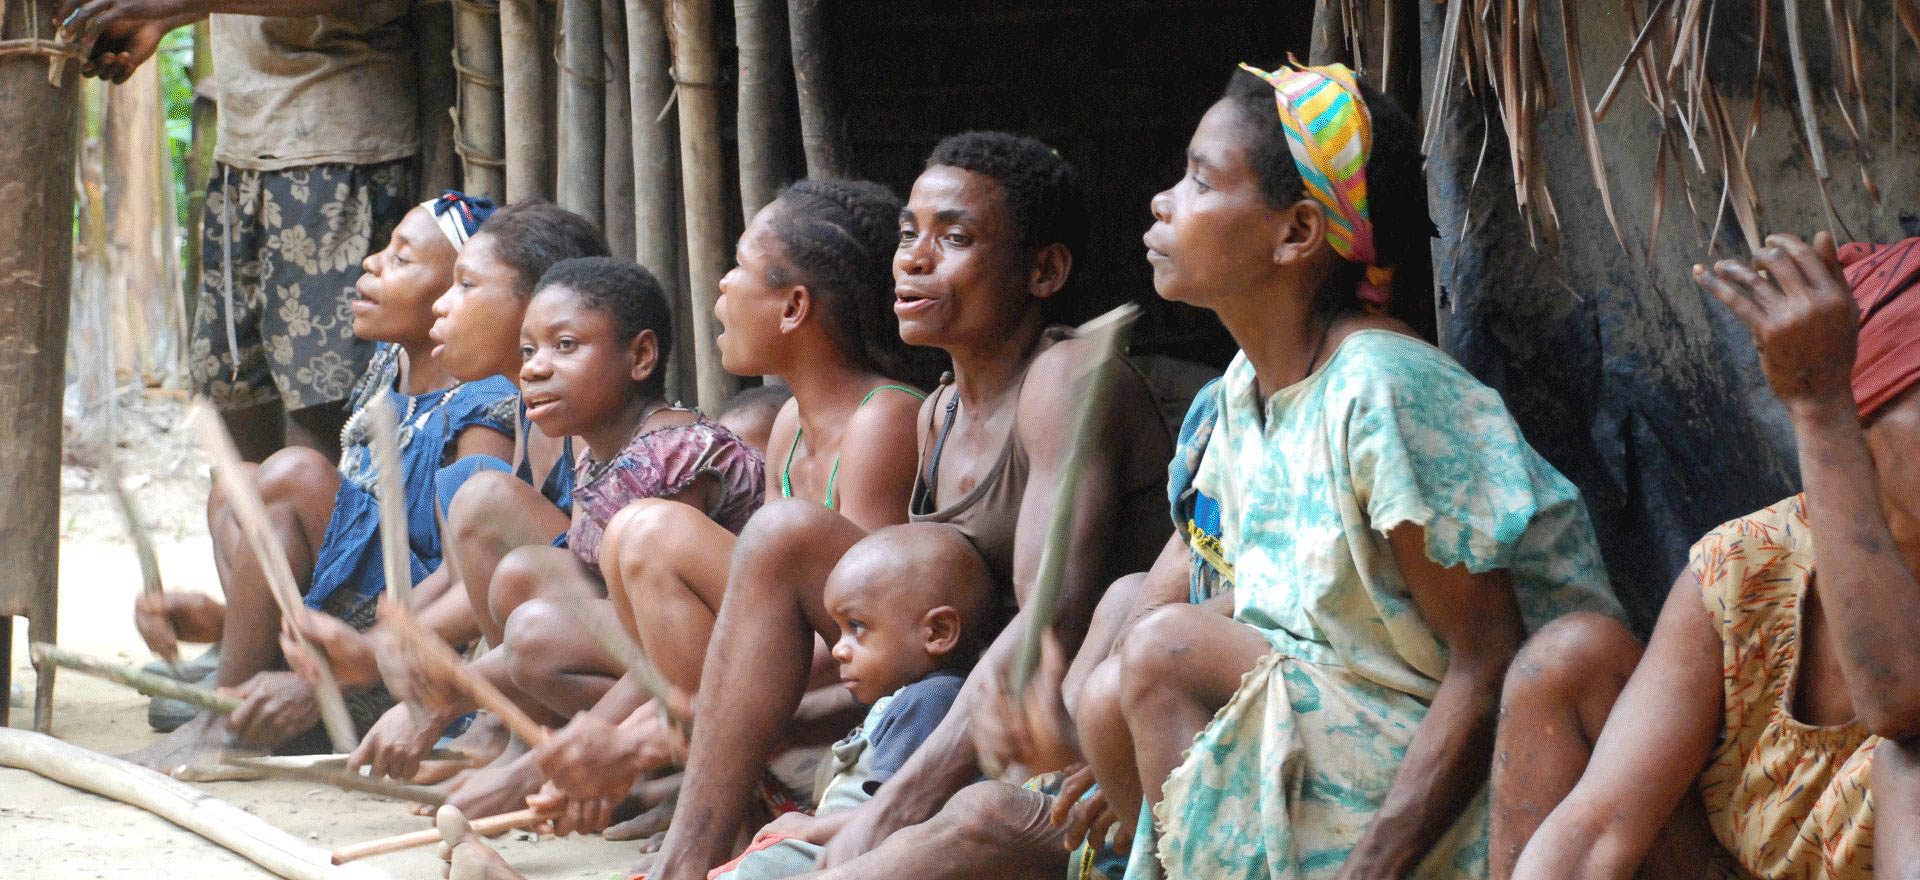 Pygmy community making traditional music - Gabon tours and holidays